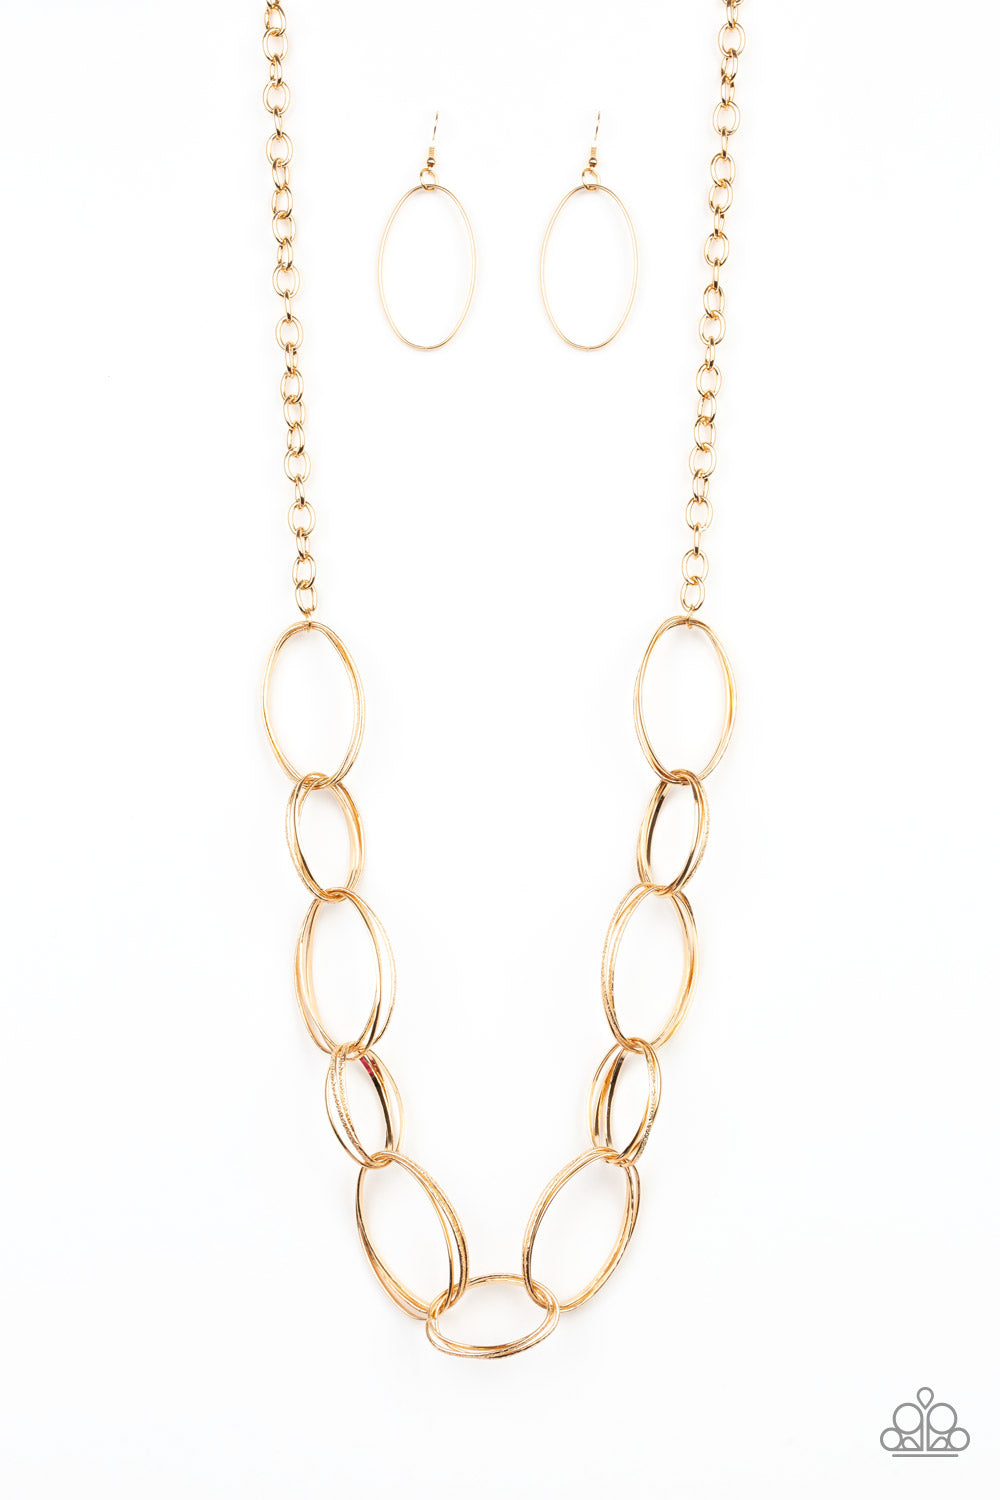 Ring Bling Gold Necklace - Paparazzi Accessories